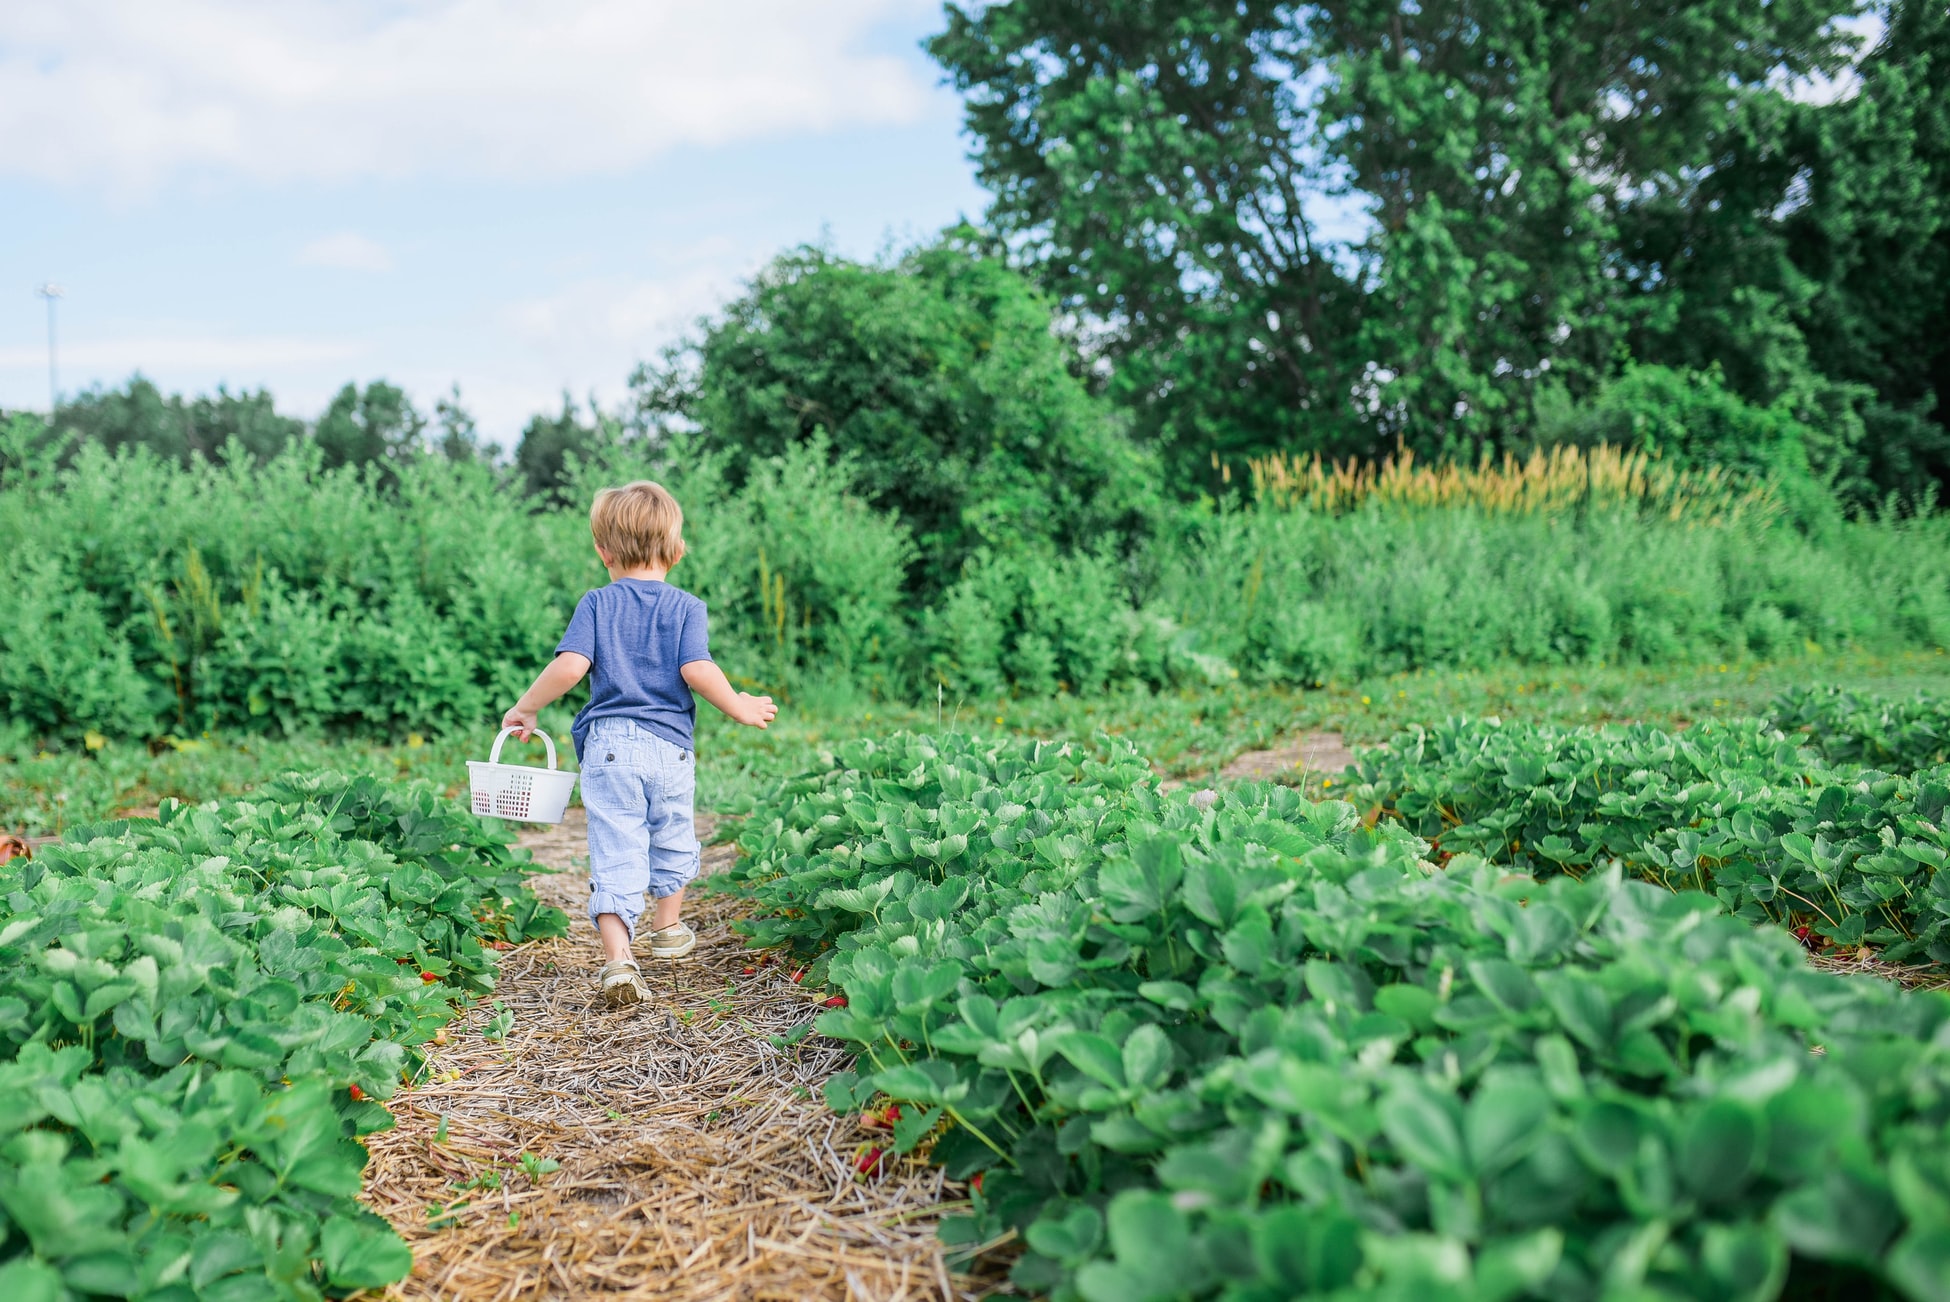 It’s a relaxing, family-friendly hobby that can also ease concerns over food security as lockdowns slow the harvesting and distribution of some crops.